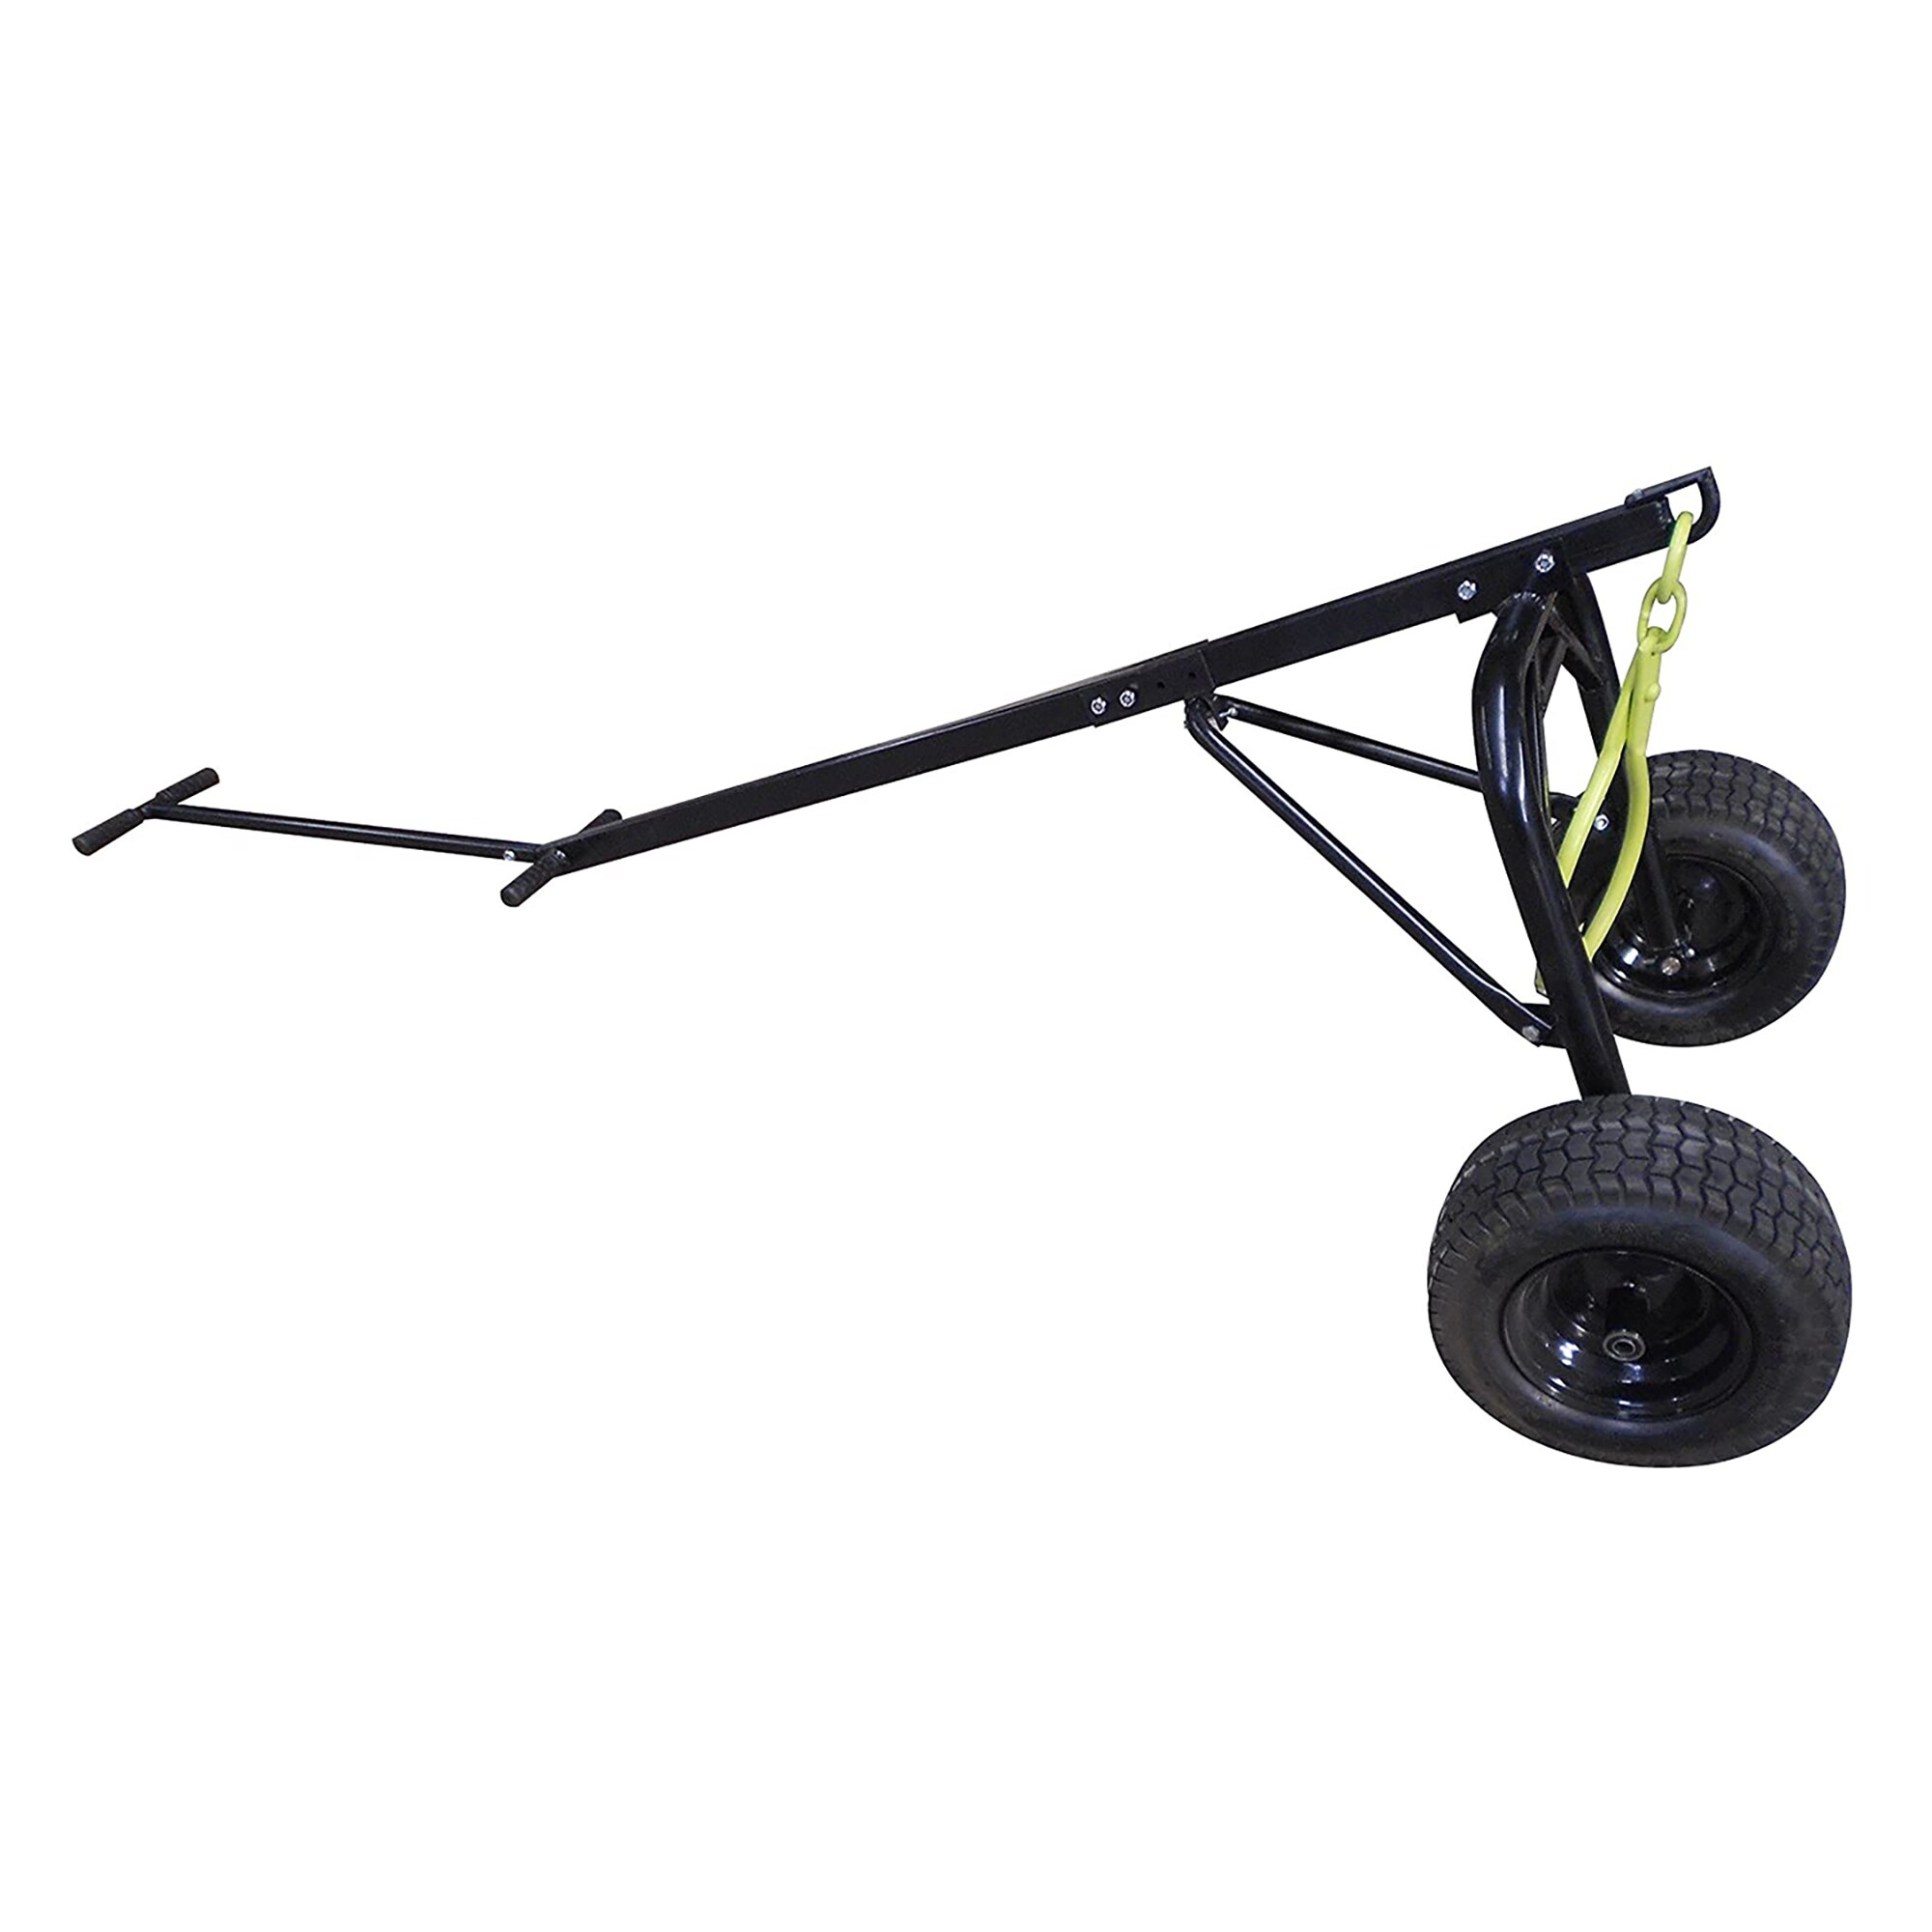 Vevor Adjustable Trailer Dolly 600-1000lbs Tongue Weight Capacity